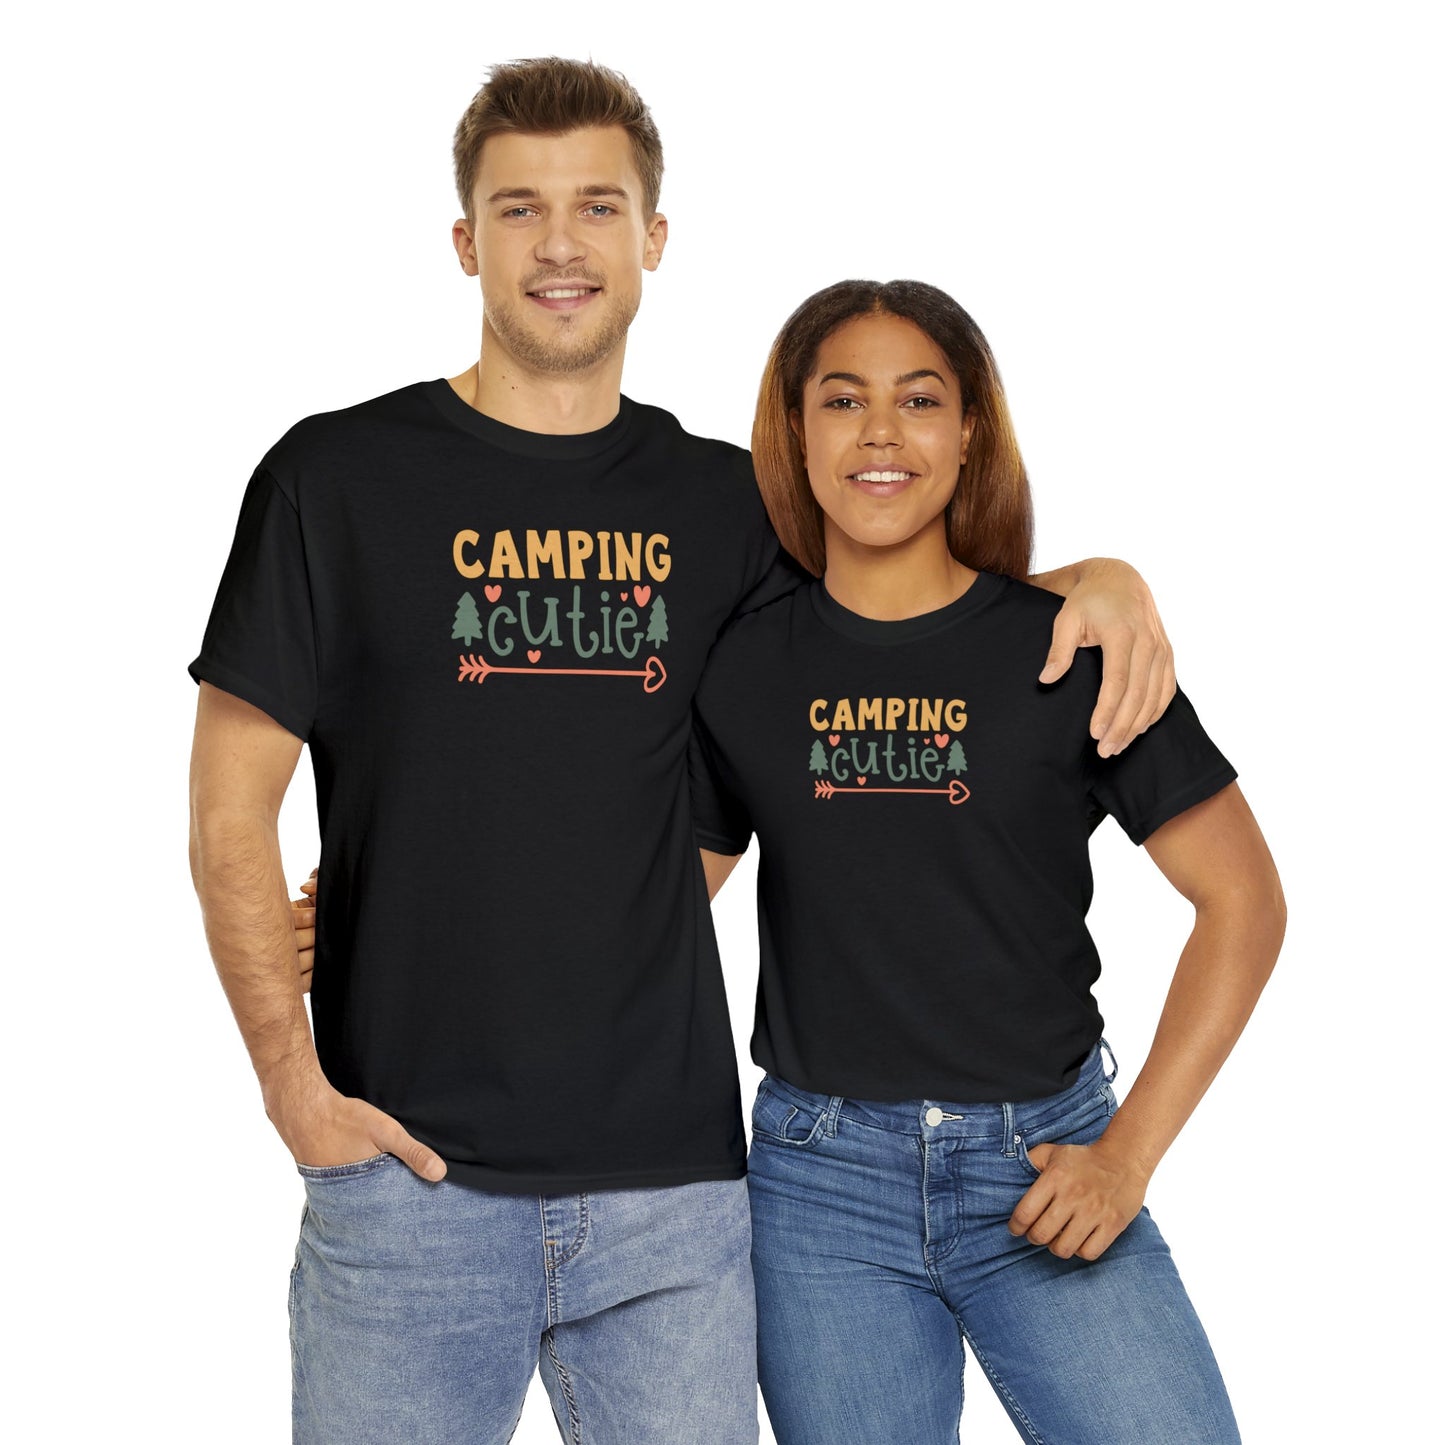 Camping Cutie Adventure in Style with Our Trendy T-shirt!